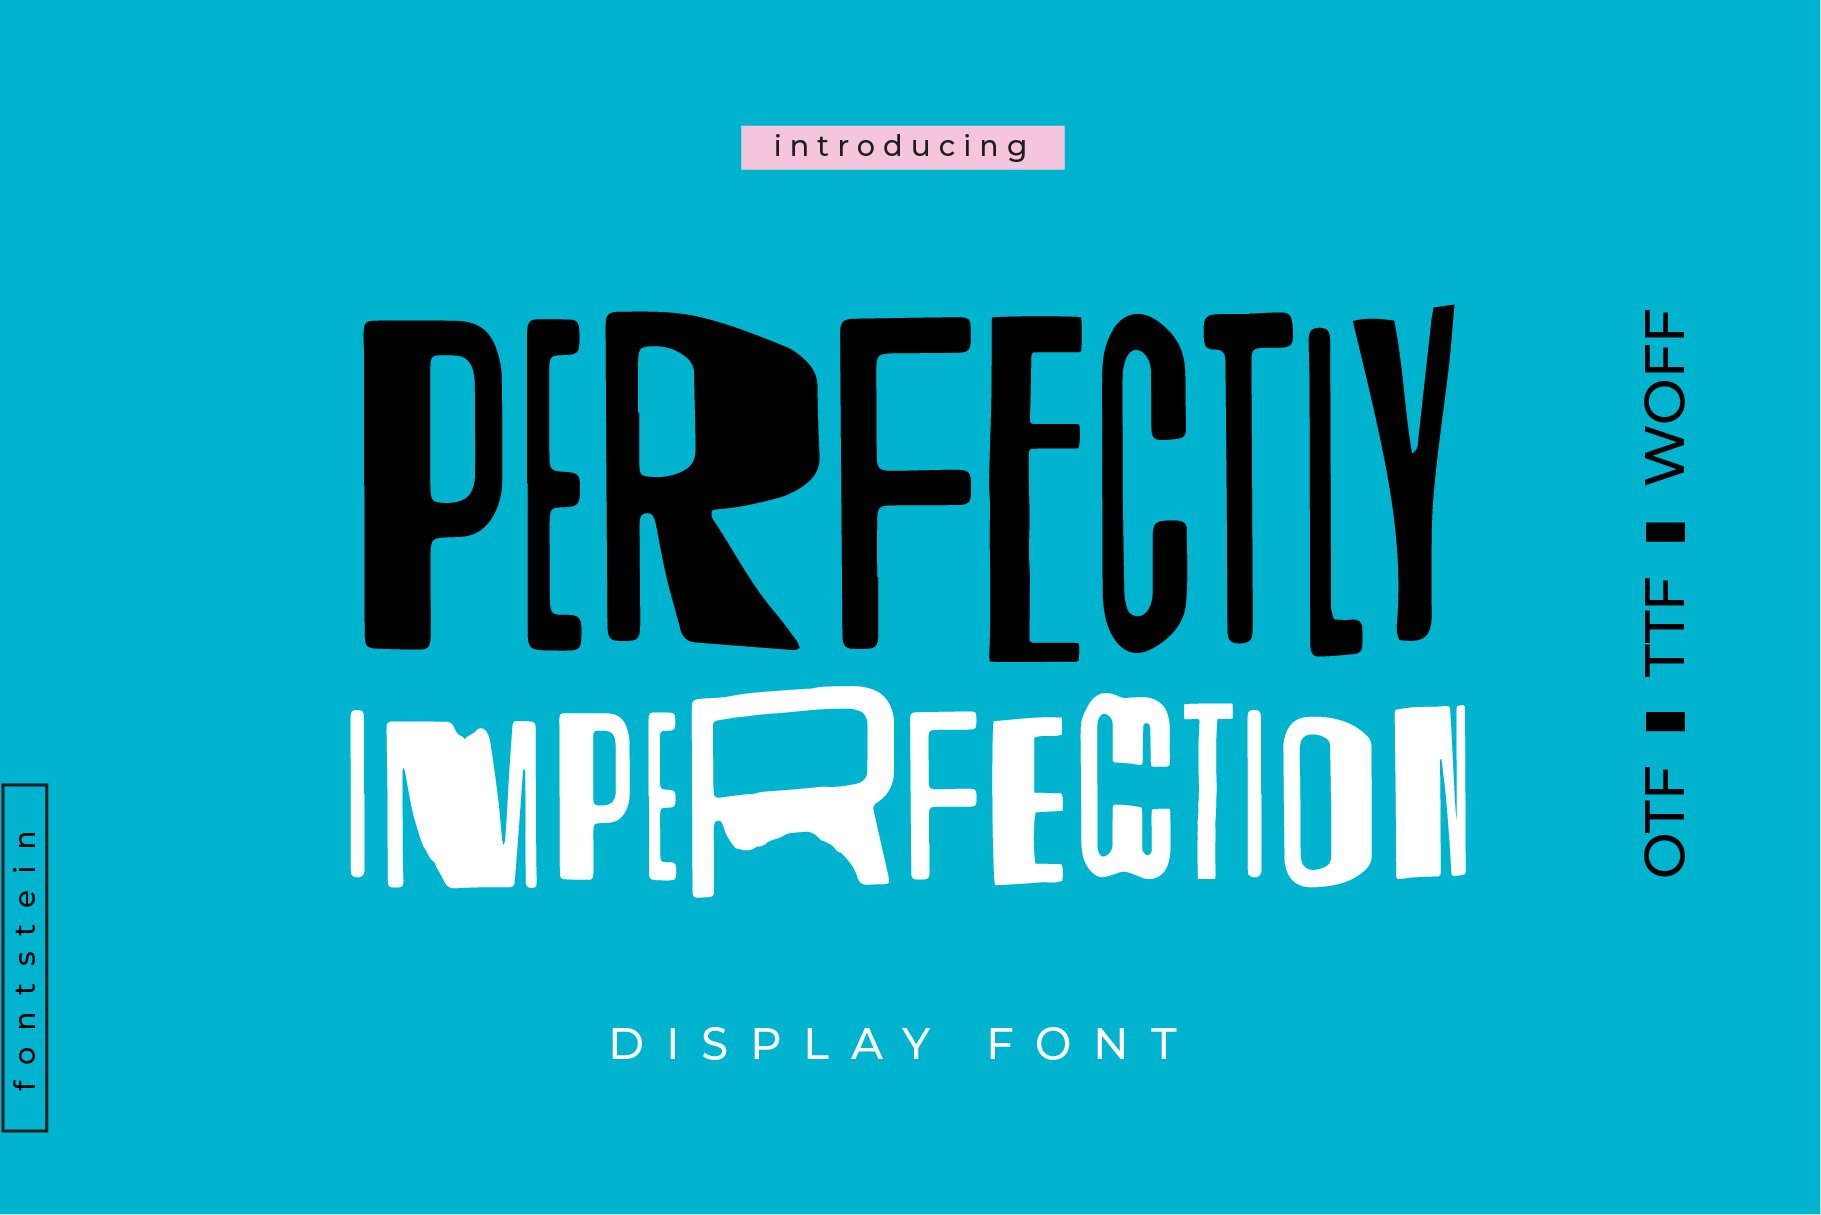 PERFECTLY IMPERFECTION | Font cover image.